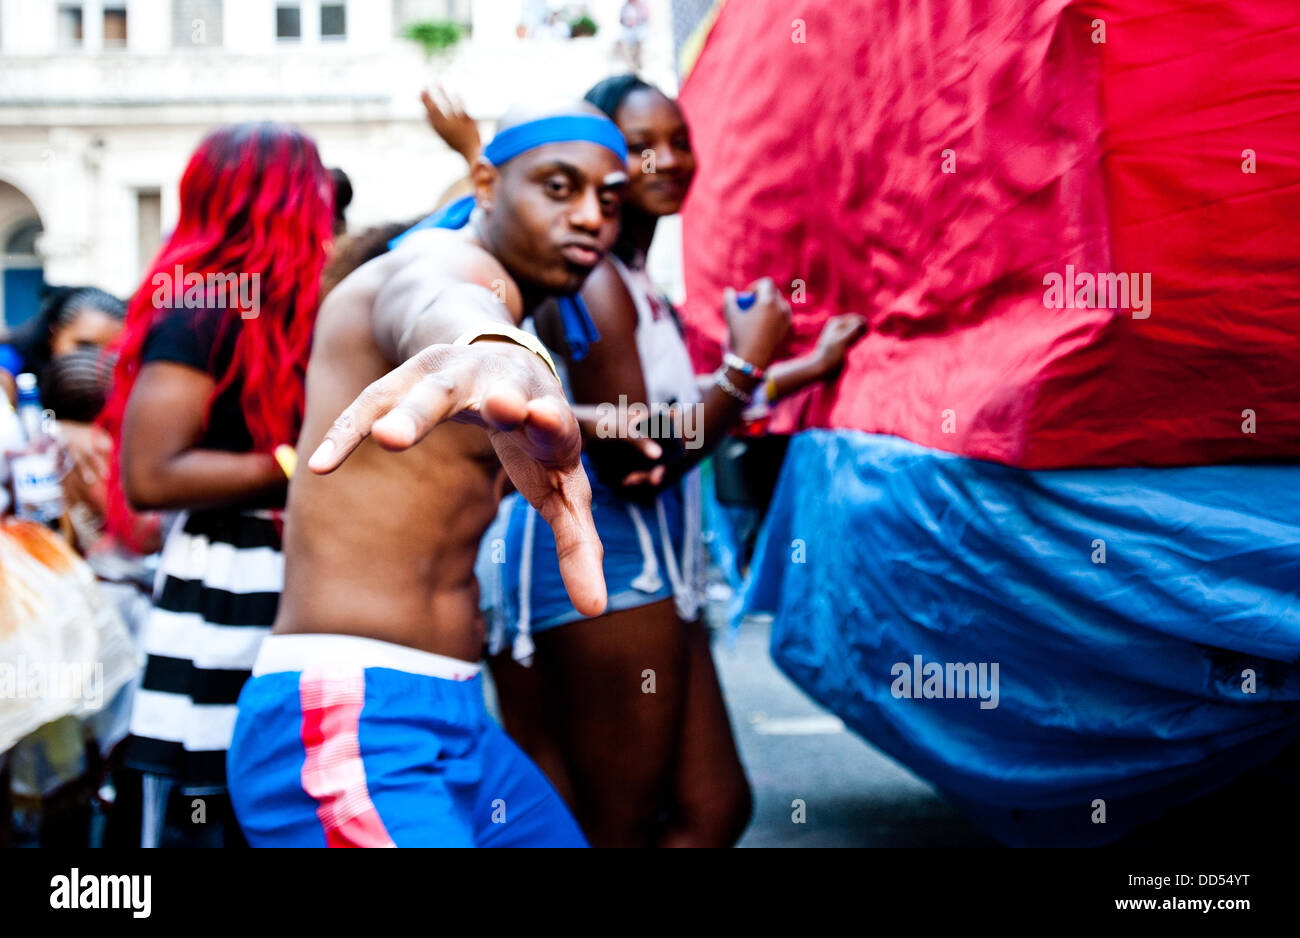 London, UK - 26 August 2013: a man dances for the camera during the annual parade at the Notting Hill Carnival. Stock Photo